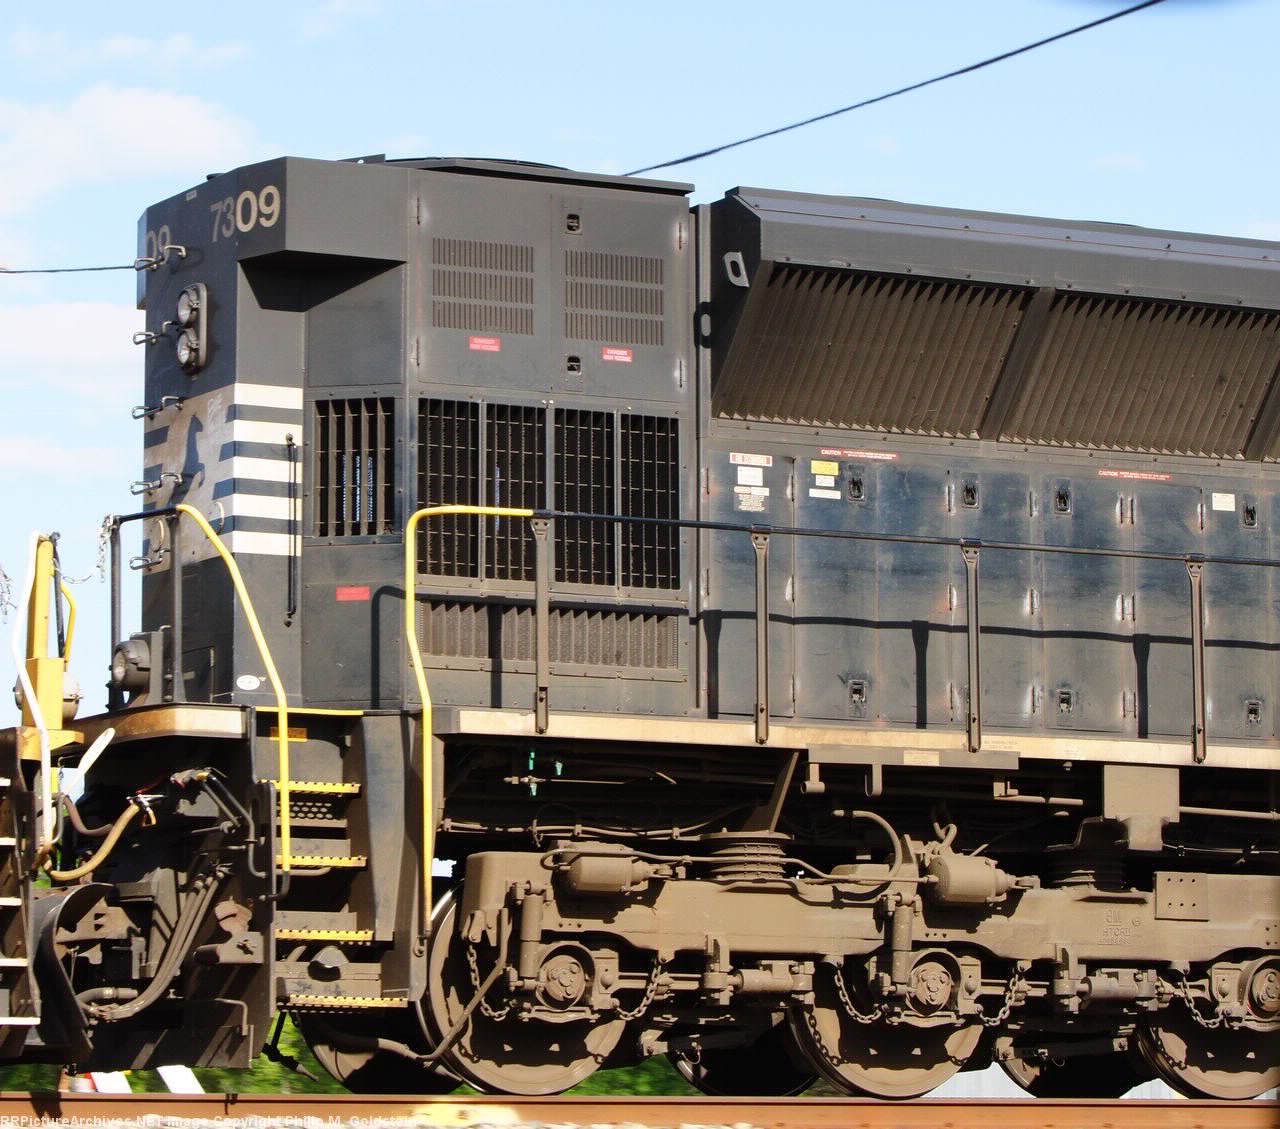 NS 7309 - those SD90 protrusions ;)